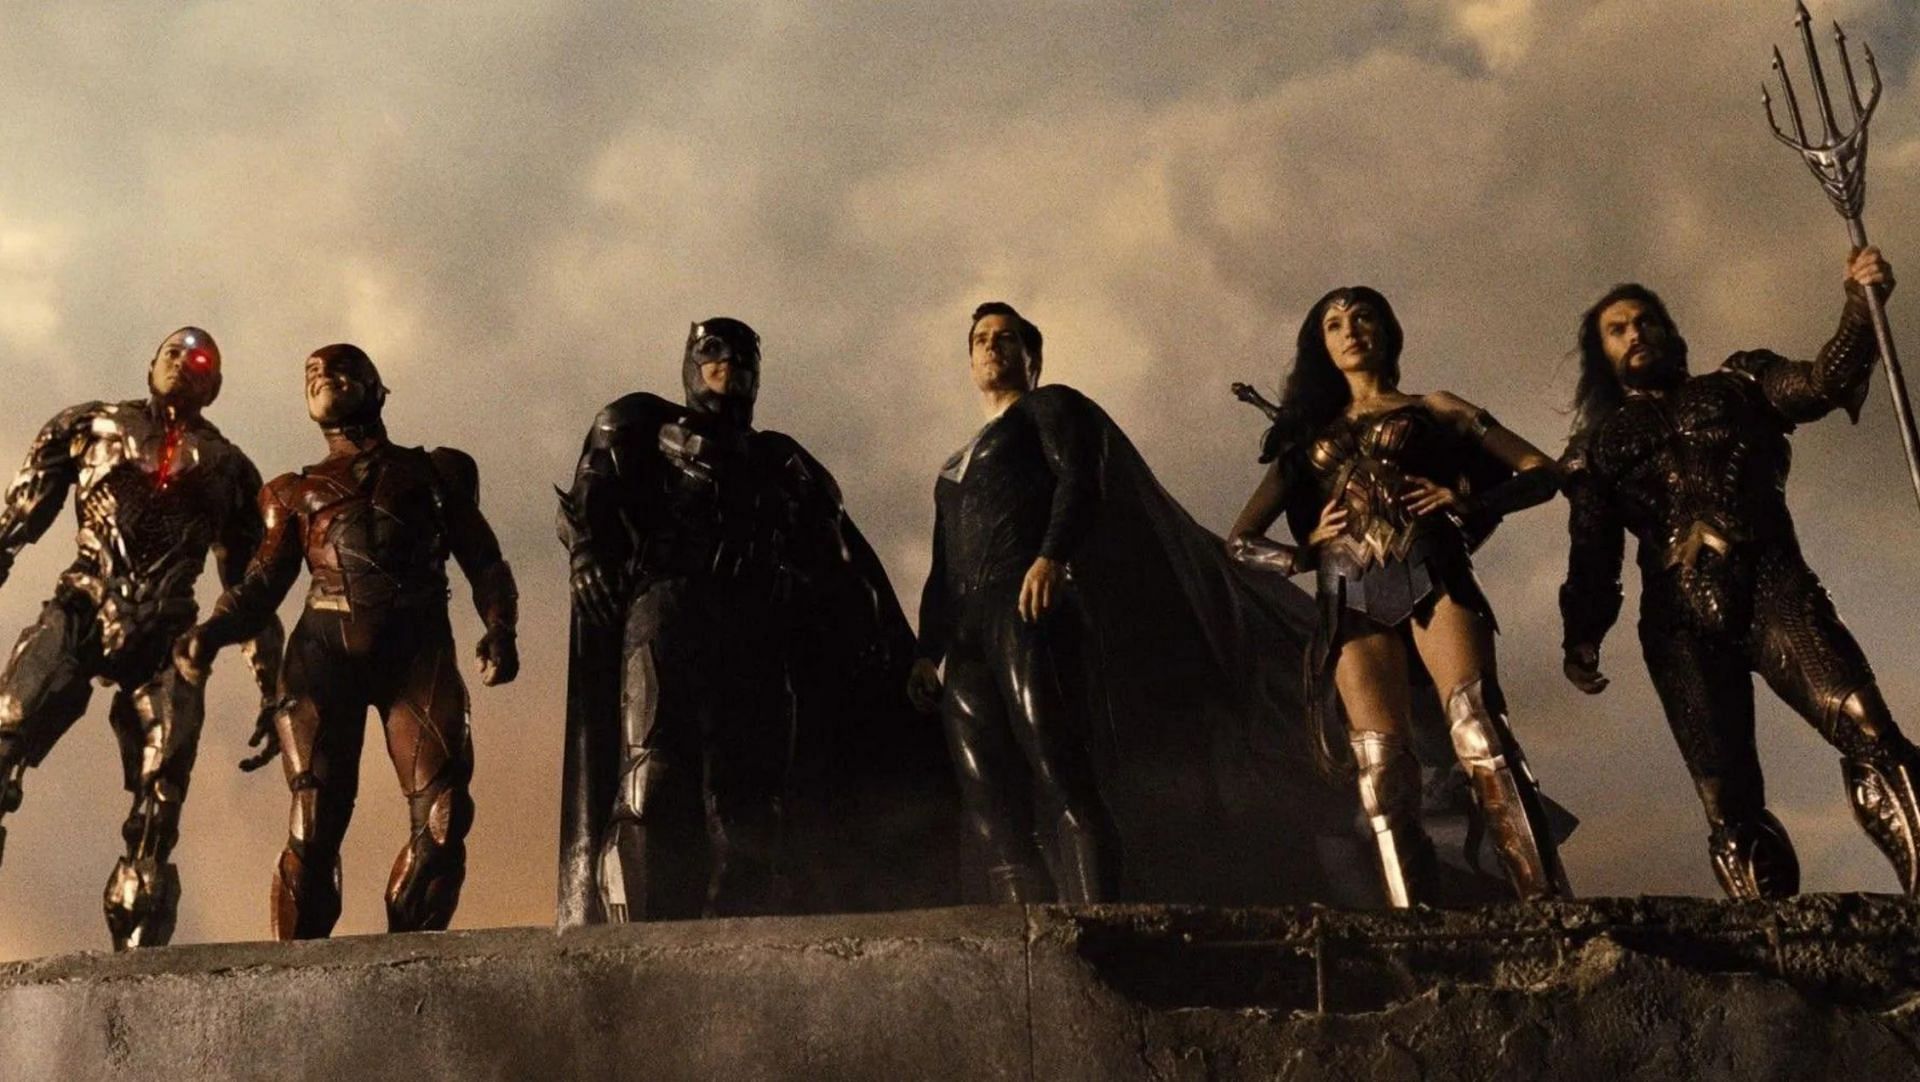 Discover the powerful message of hope and unity that runs throughout the film (Image via DC Studios)